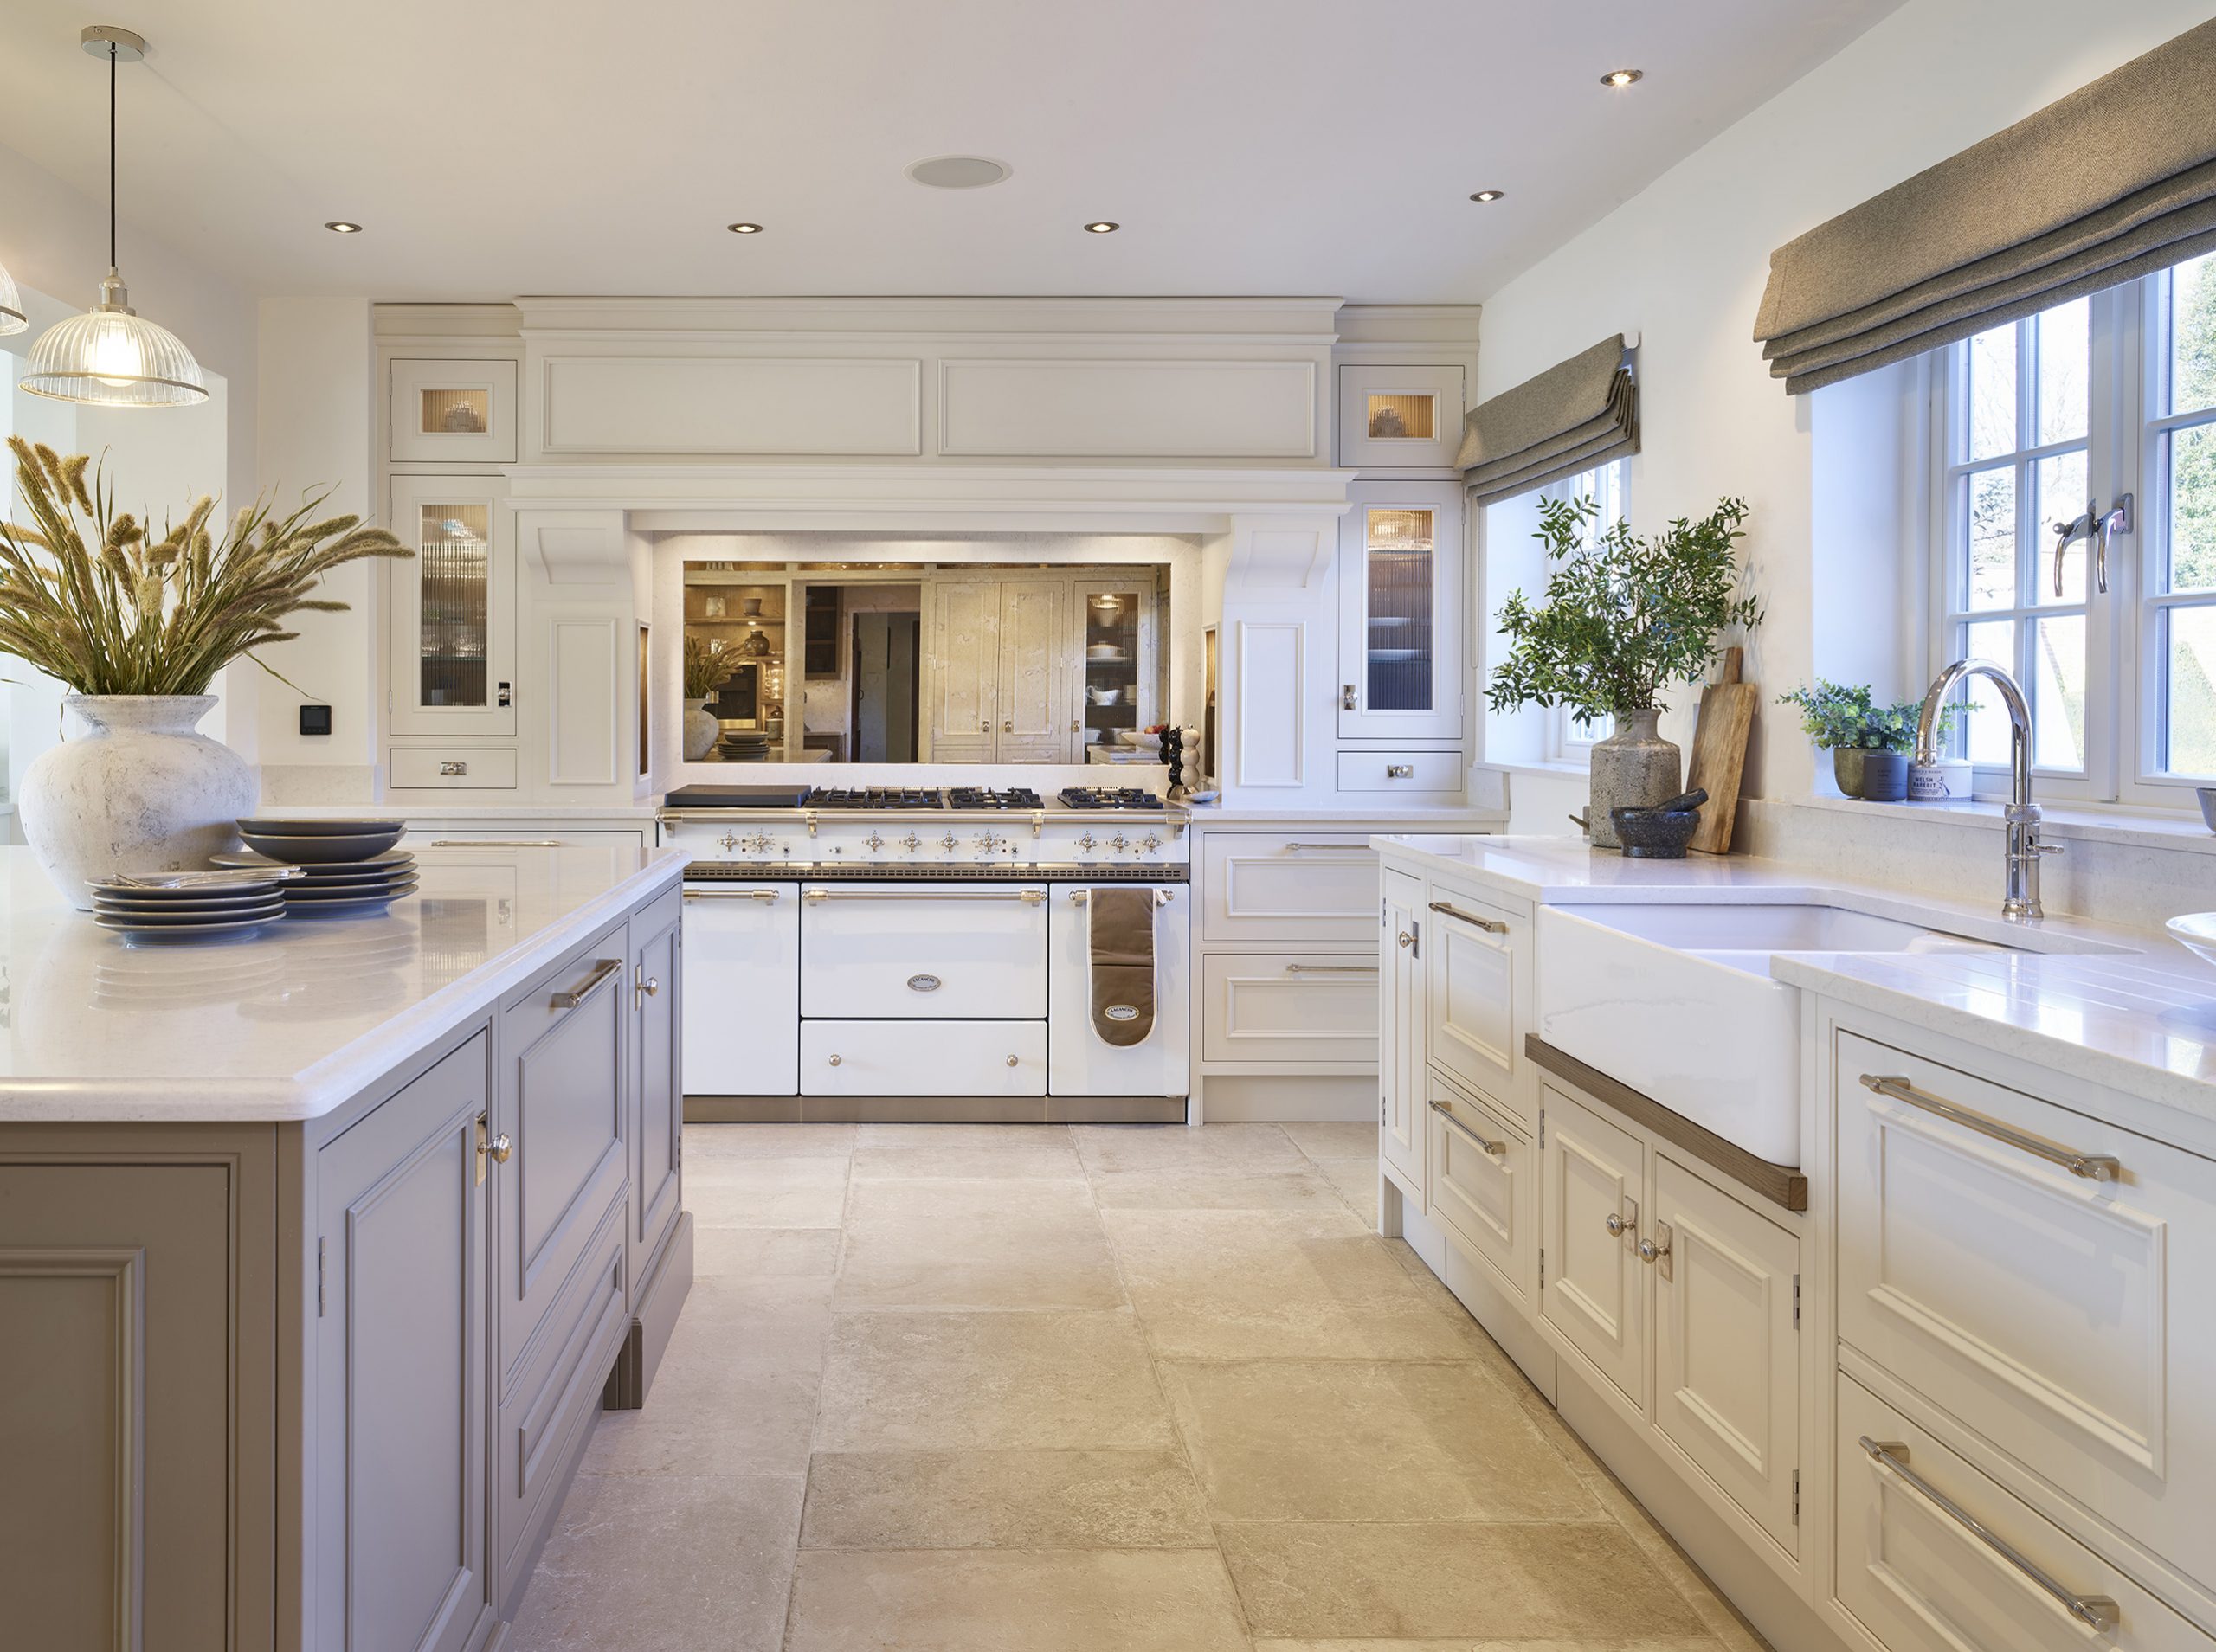 Classic Englemere Charles & Yorke kitchen in a timeless neutral
palette.